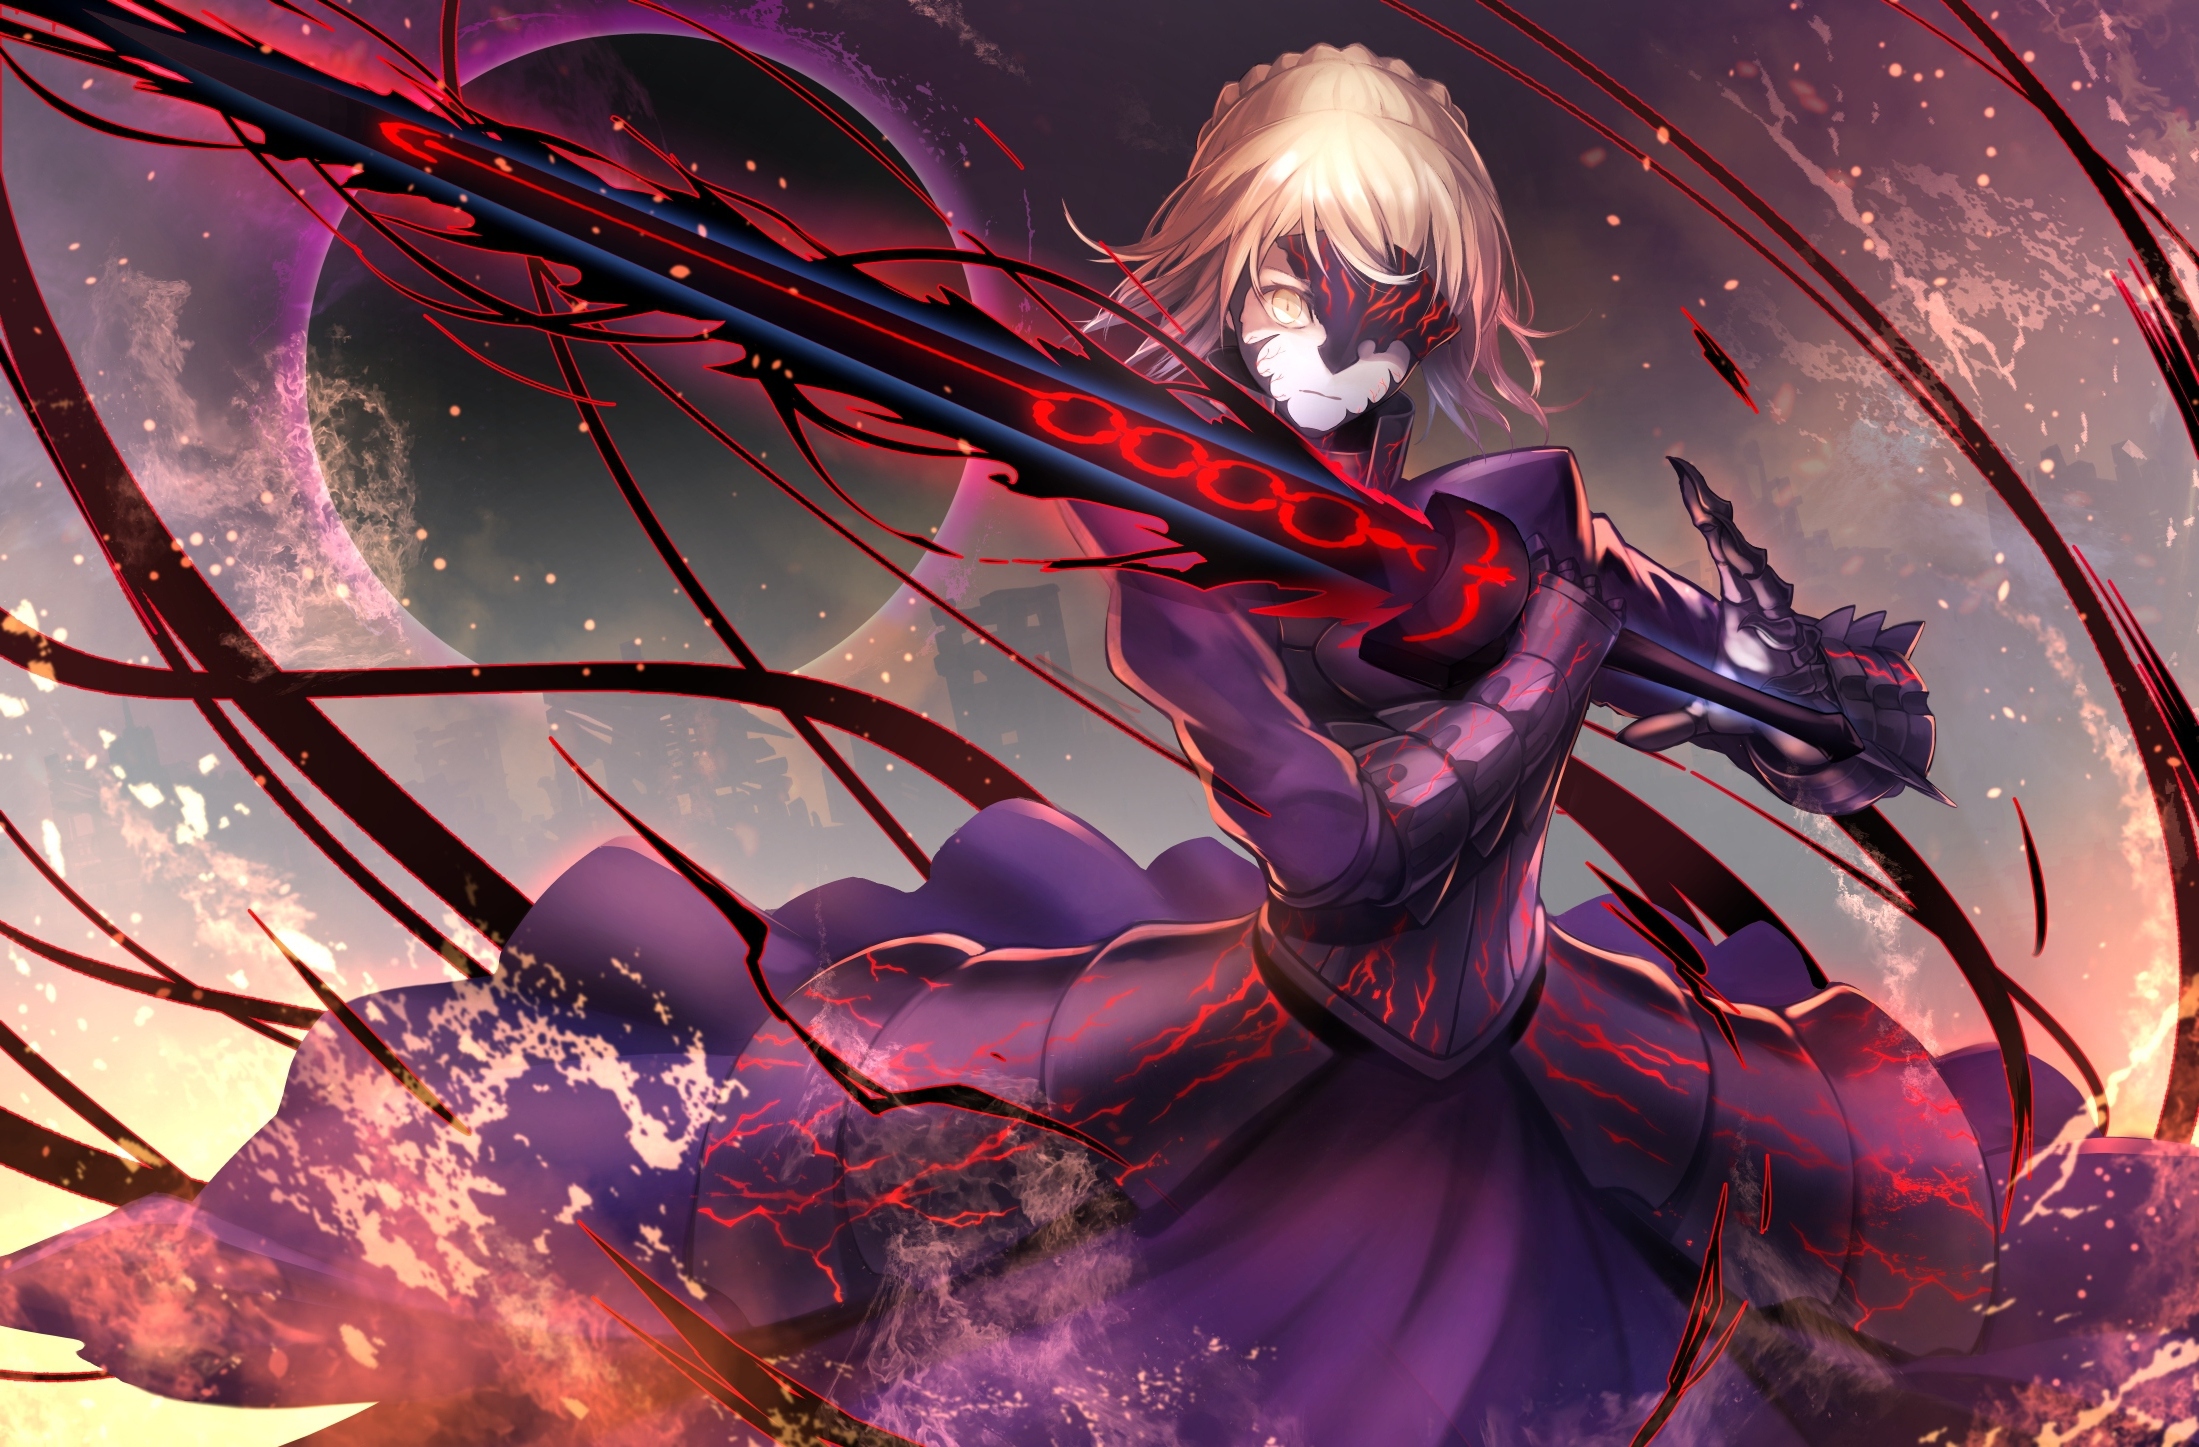 Wallpaper Armor Saber Alter Two Handed Sword Fate Grand Order Dress Transformation Blonde Resolution 2199x1447 Wallpx